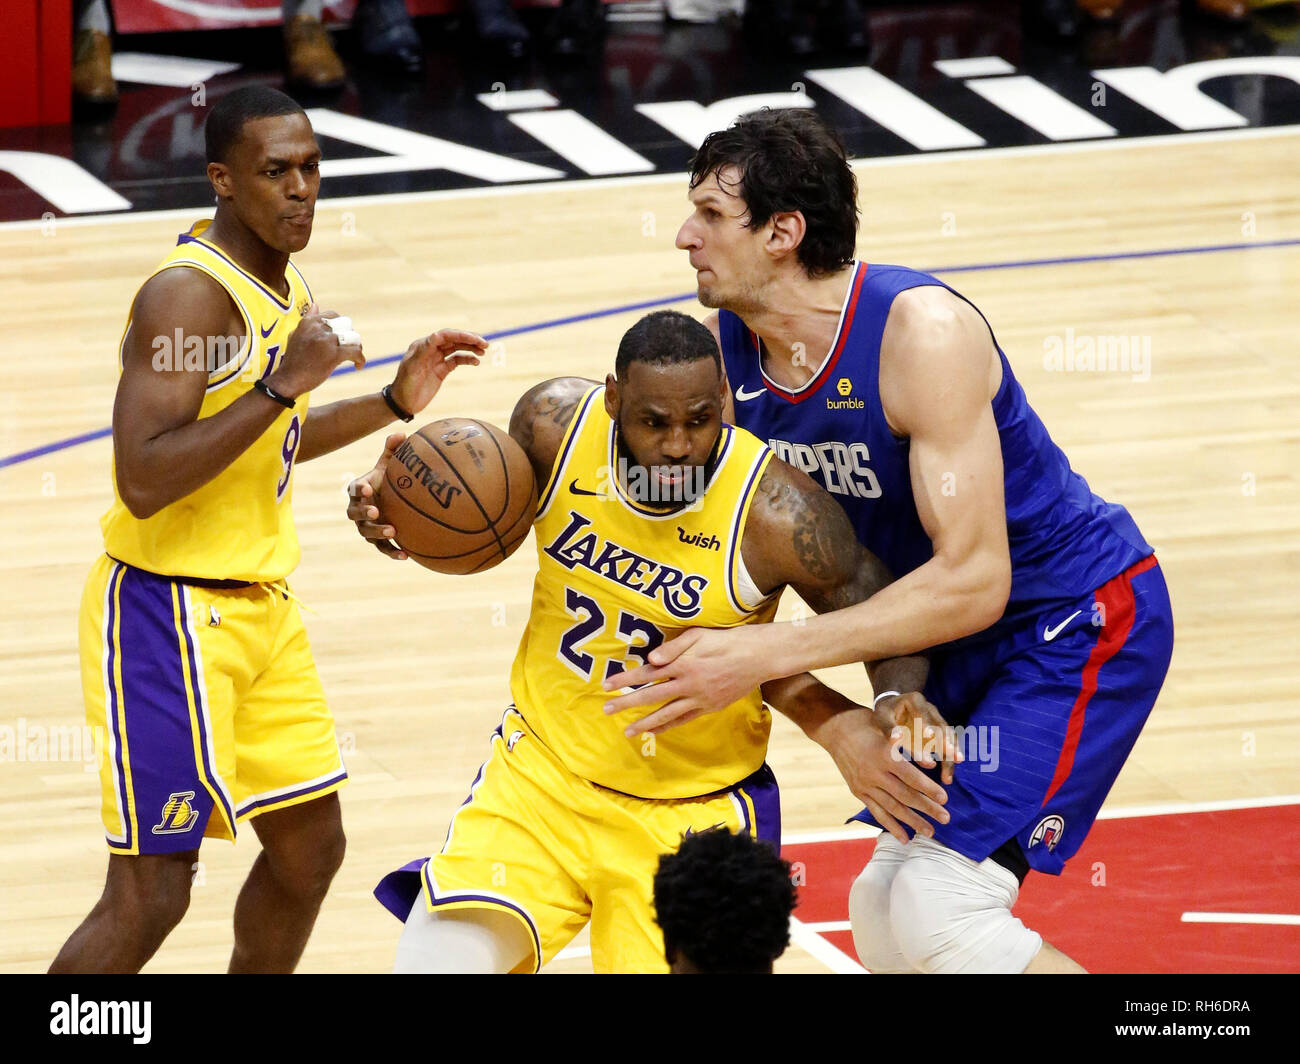 Los Angeles, CA, USA. 11th Dec, 2018. LA Clippers center Boban Marjanovic  #51 shooting free throws before the Toronto Raptors vs Los Angeles Clippers  at Staples Center on December 11, 2018. (Photo